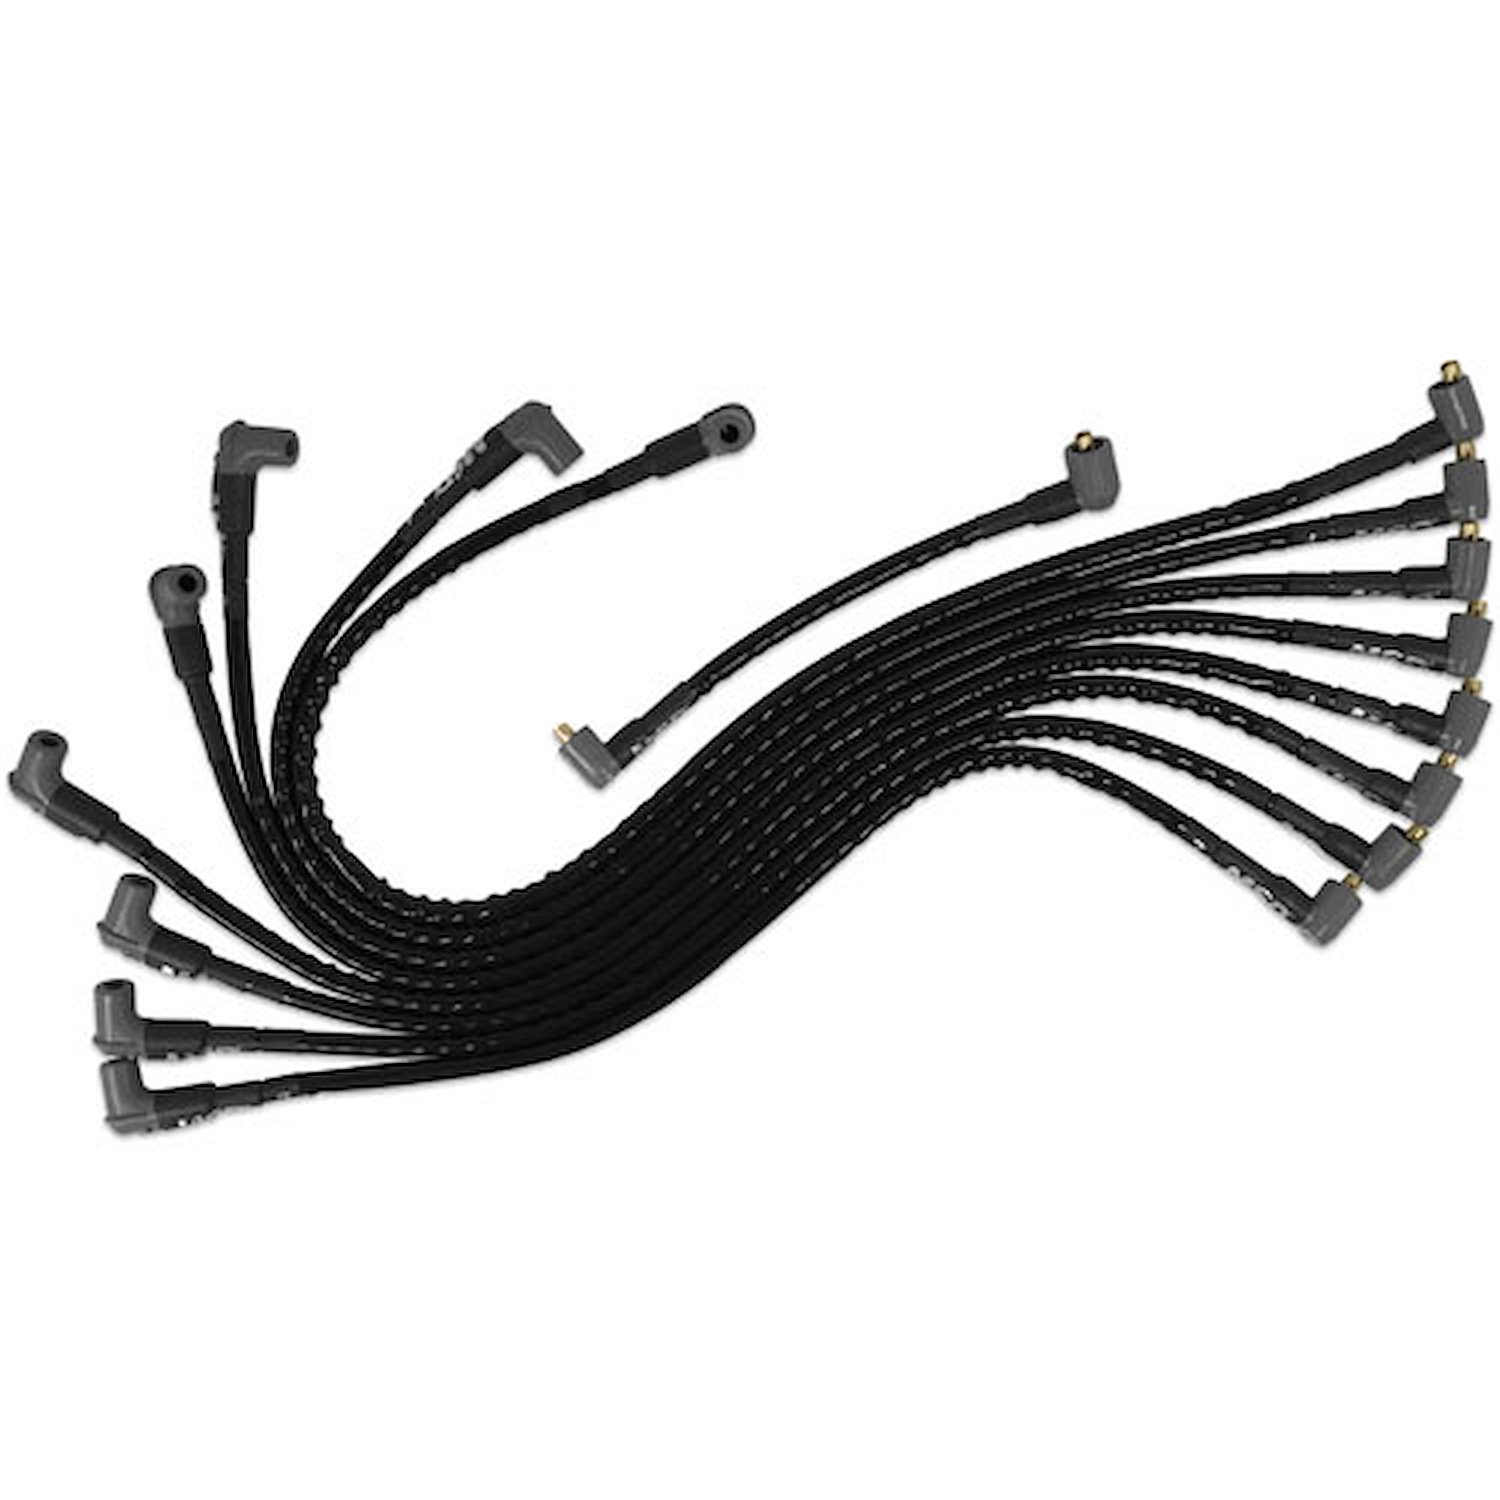 Super Conductor 8.5mm Sleeved Wire Set Black